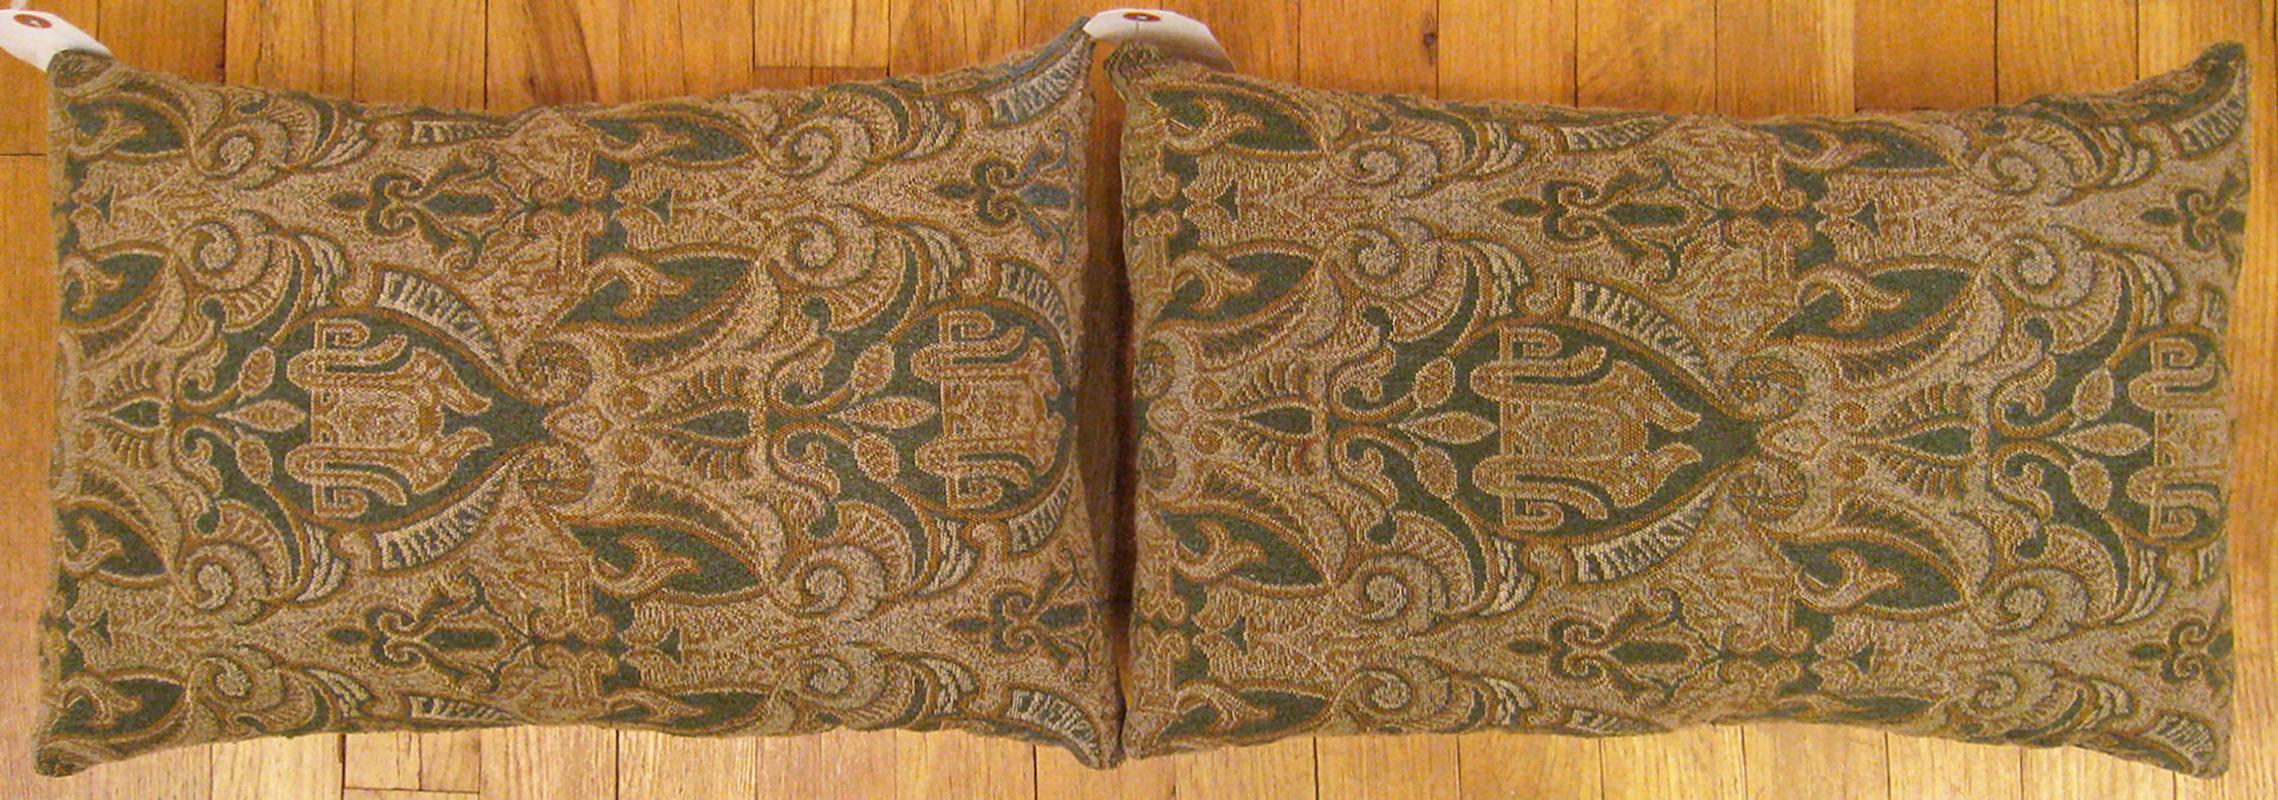 A pair of antique jacquard tapestry pillows ; size 1'0” x 1'7” each. 

An antique decorative pillows with geometric abstracts allover a light brown central field, size 1'0